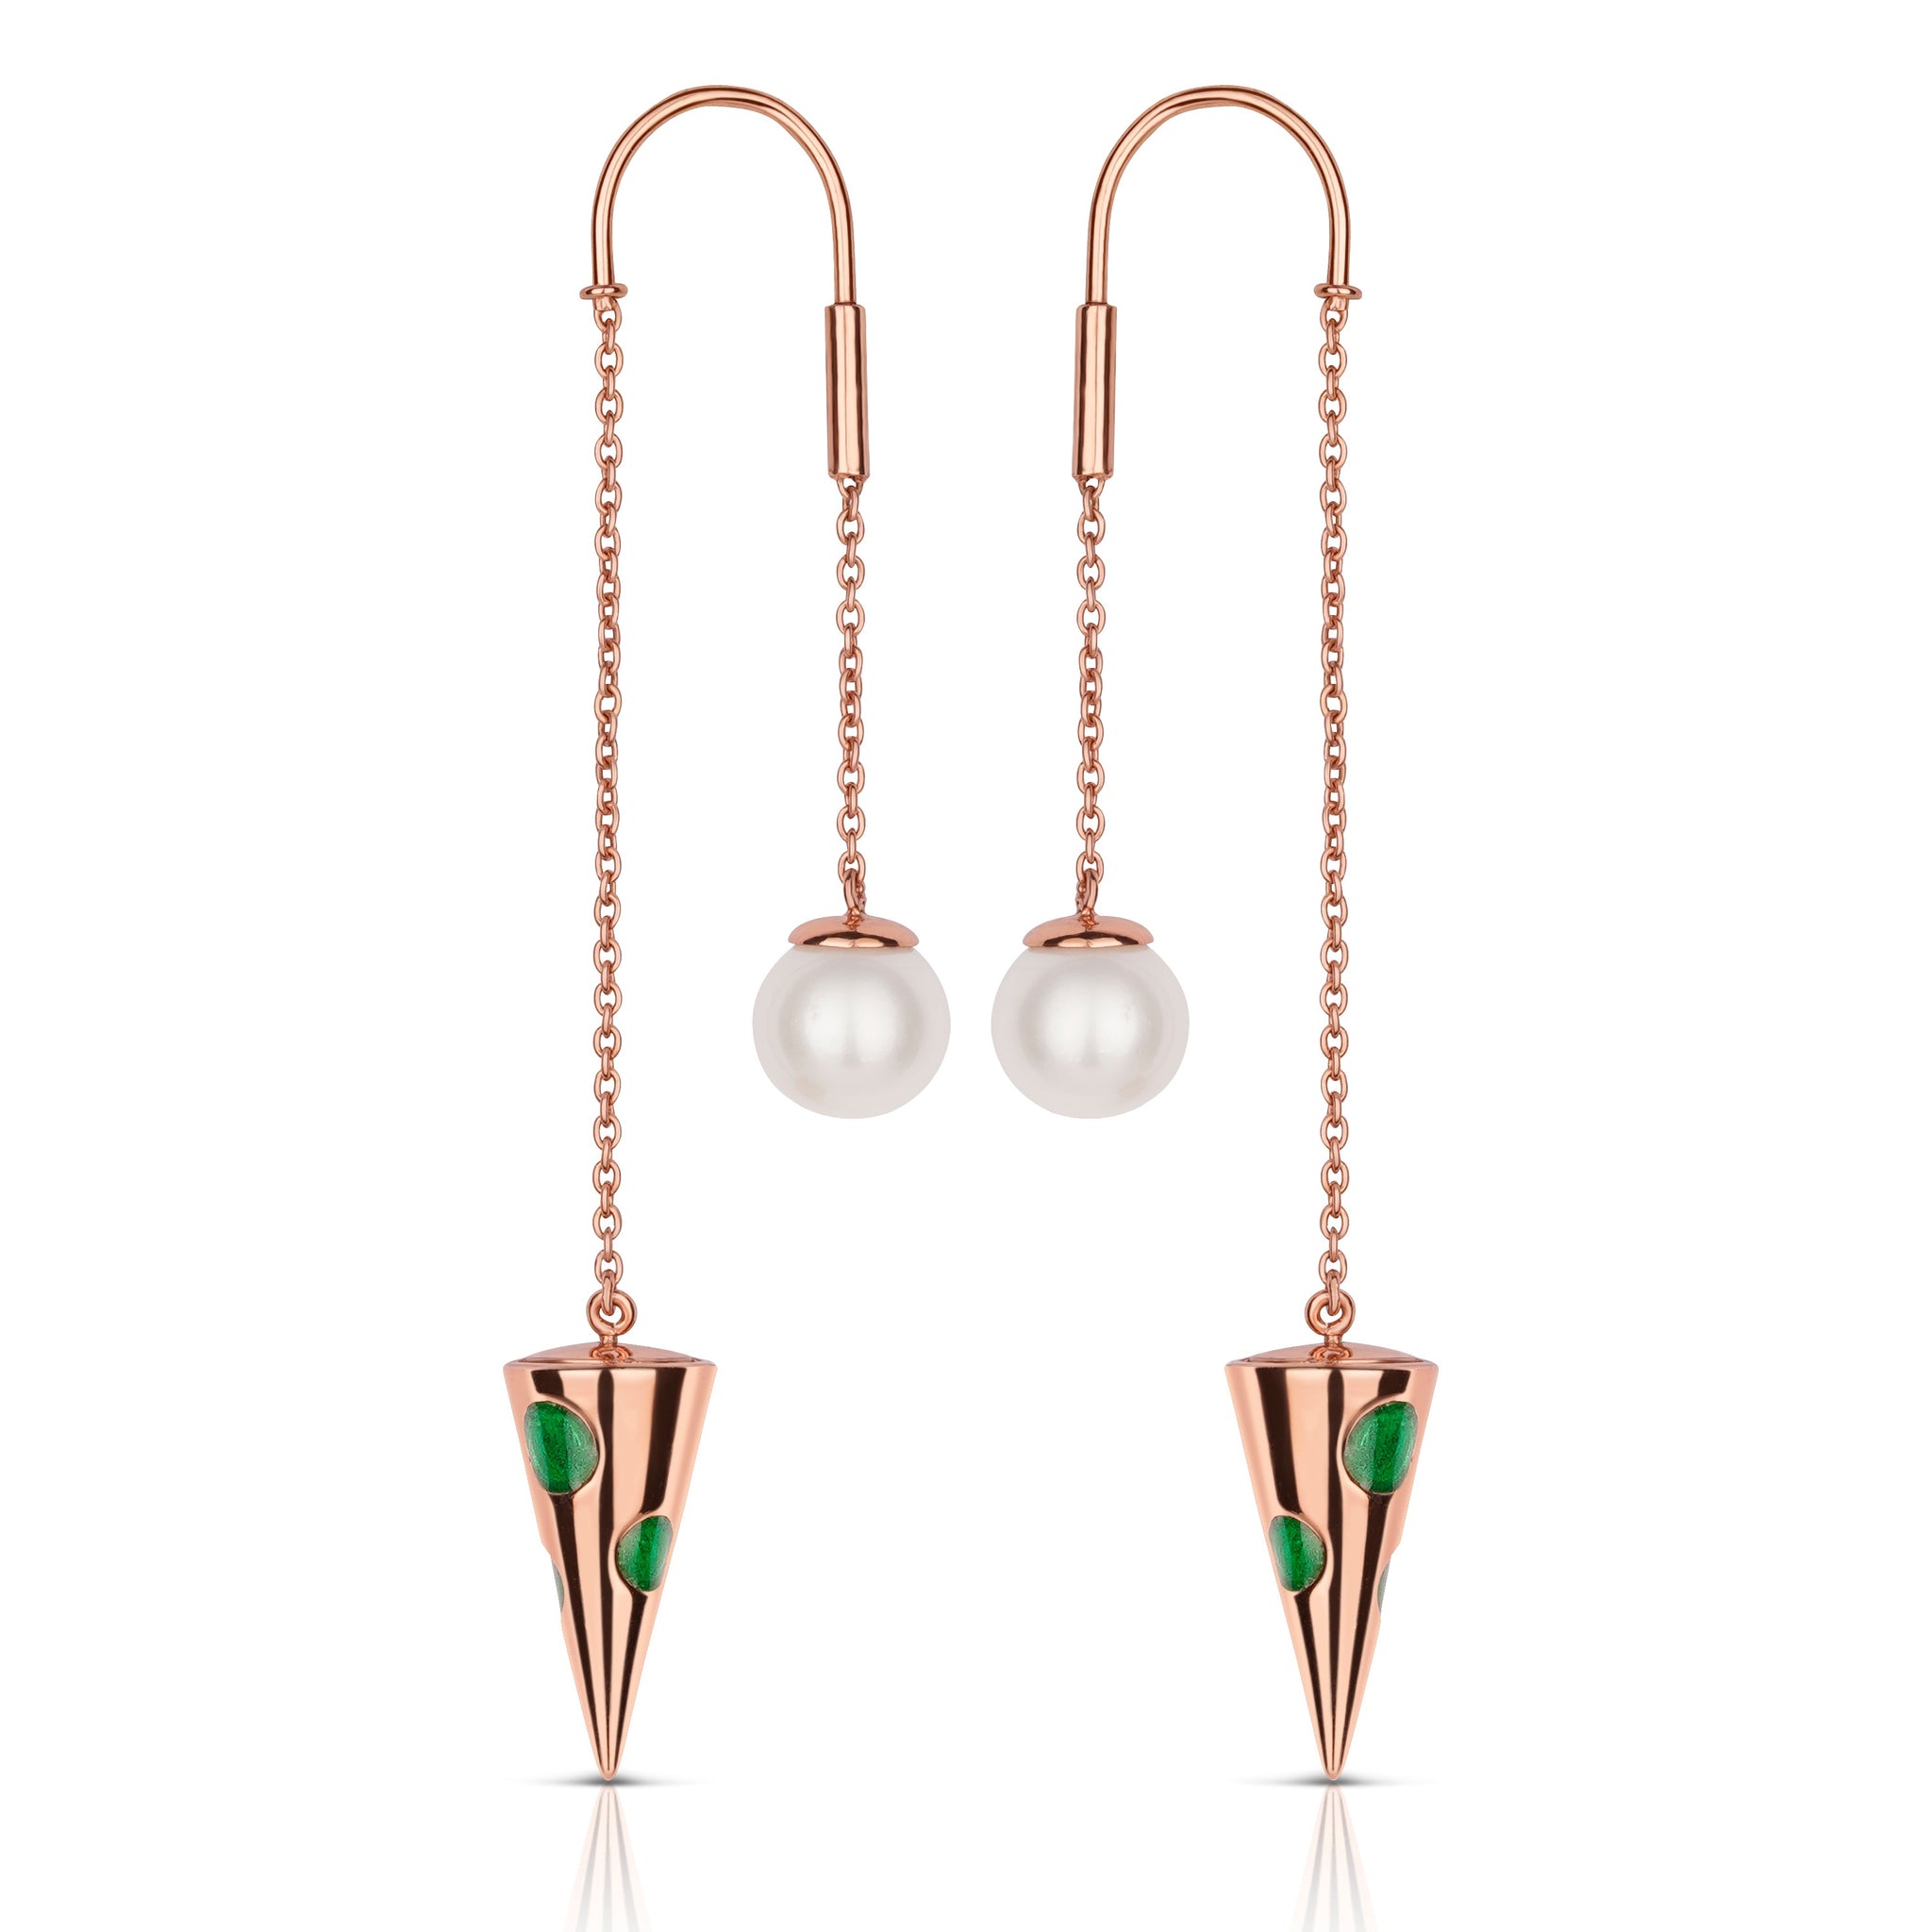 Poise & Pearl Earrings - Rose and Green